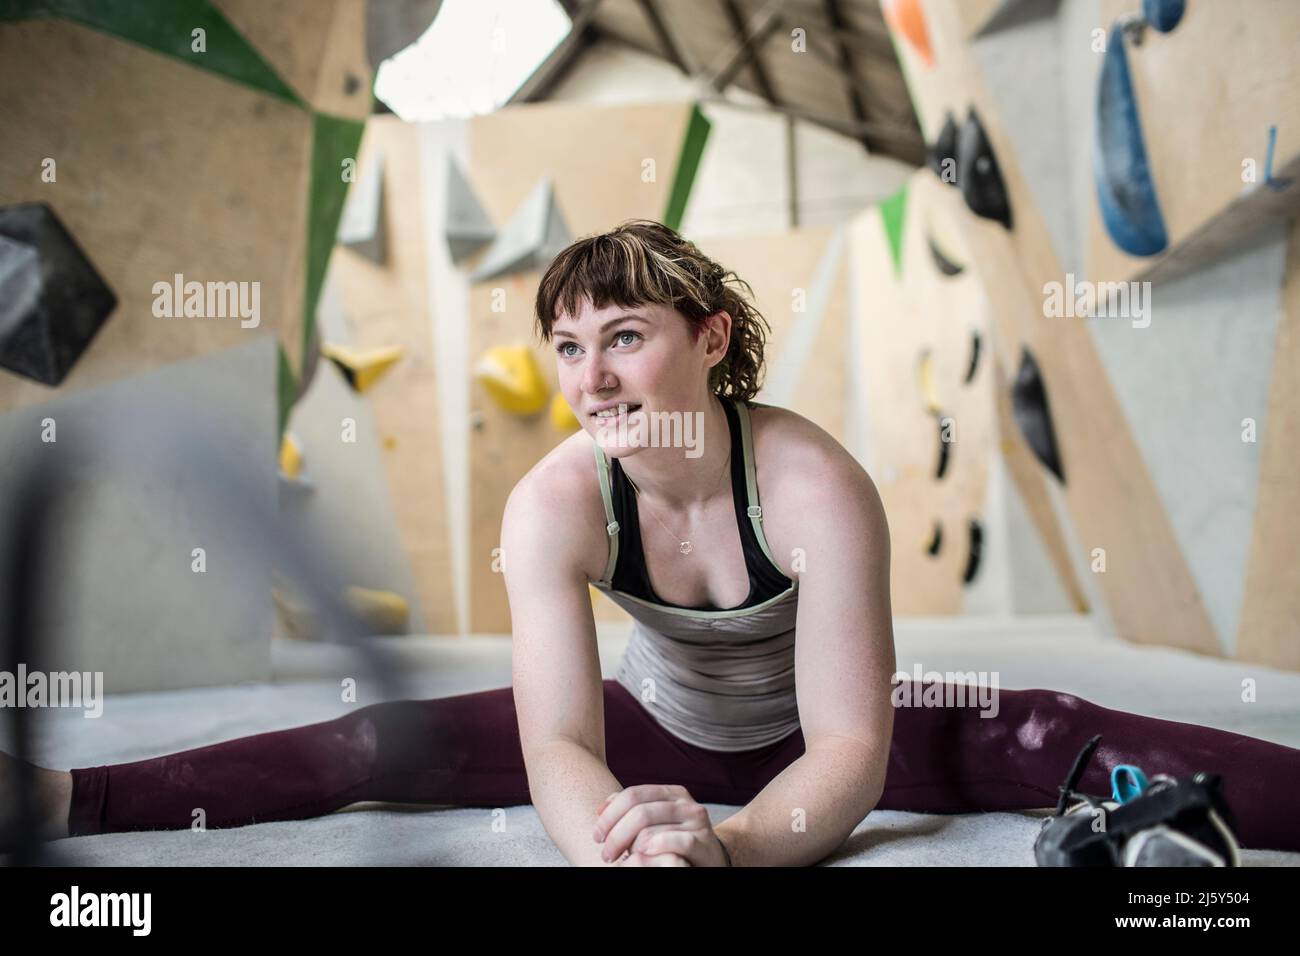 Young female rock climber stretching in climbing gym Stock Photo